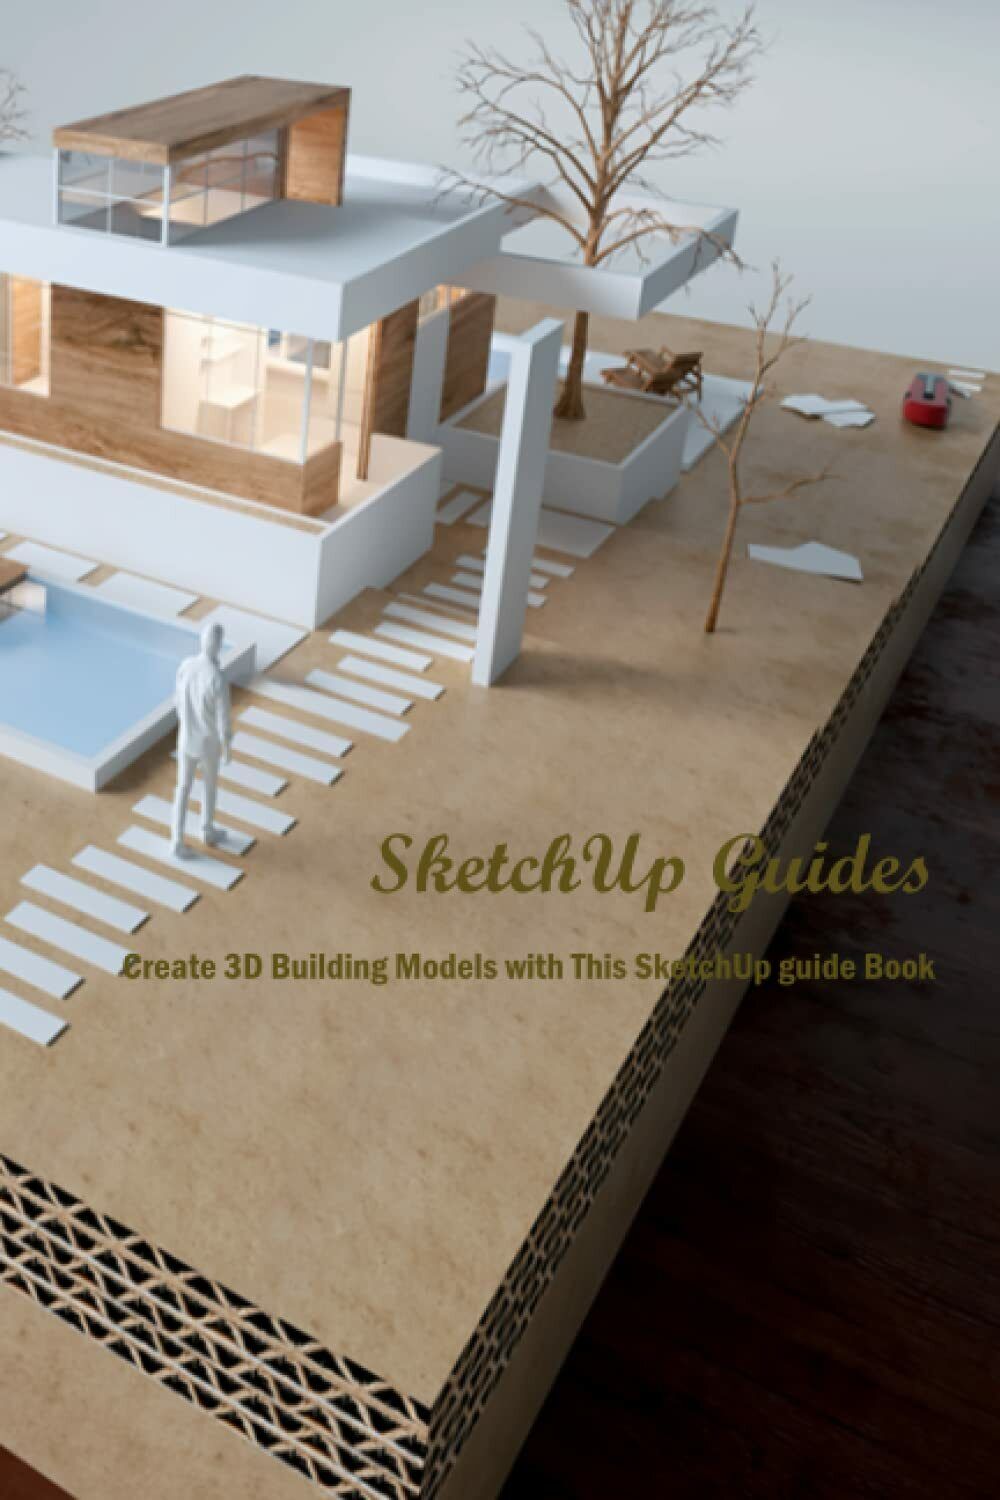 SketchUp Guides: Create 3D Building Models with This SketchUp guide Book di Mr J